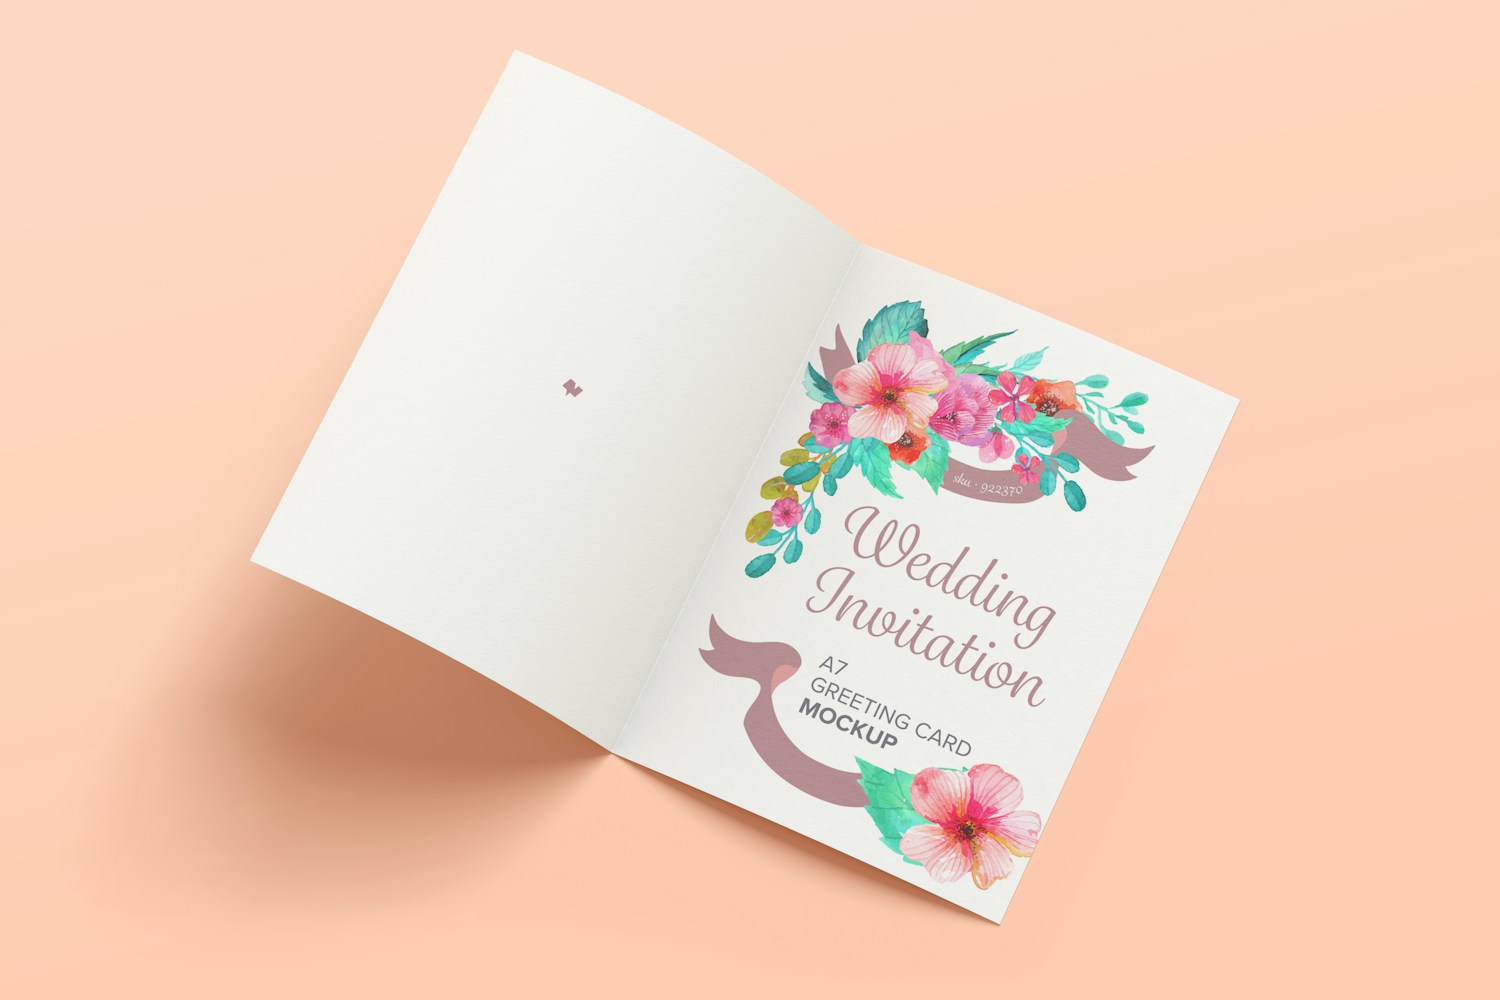 A7 Greeting Card Mockup, Spread Interior Pages